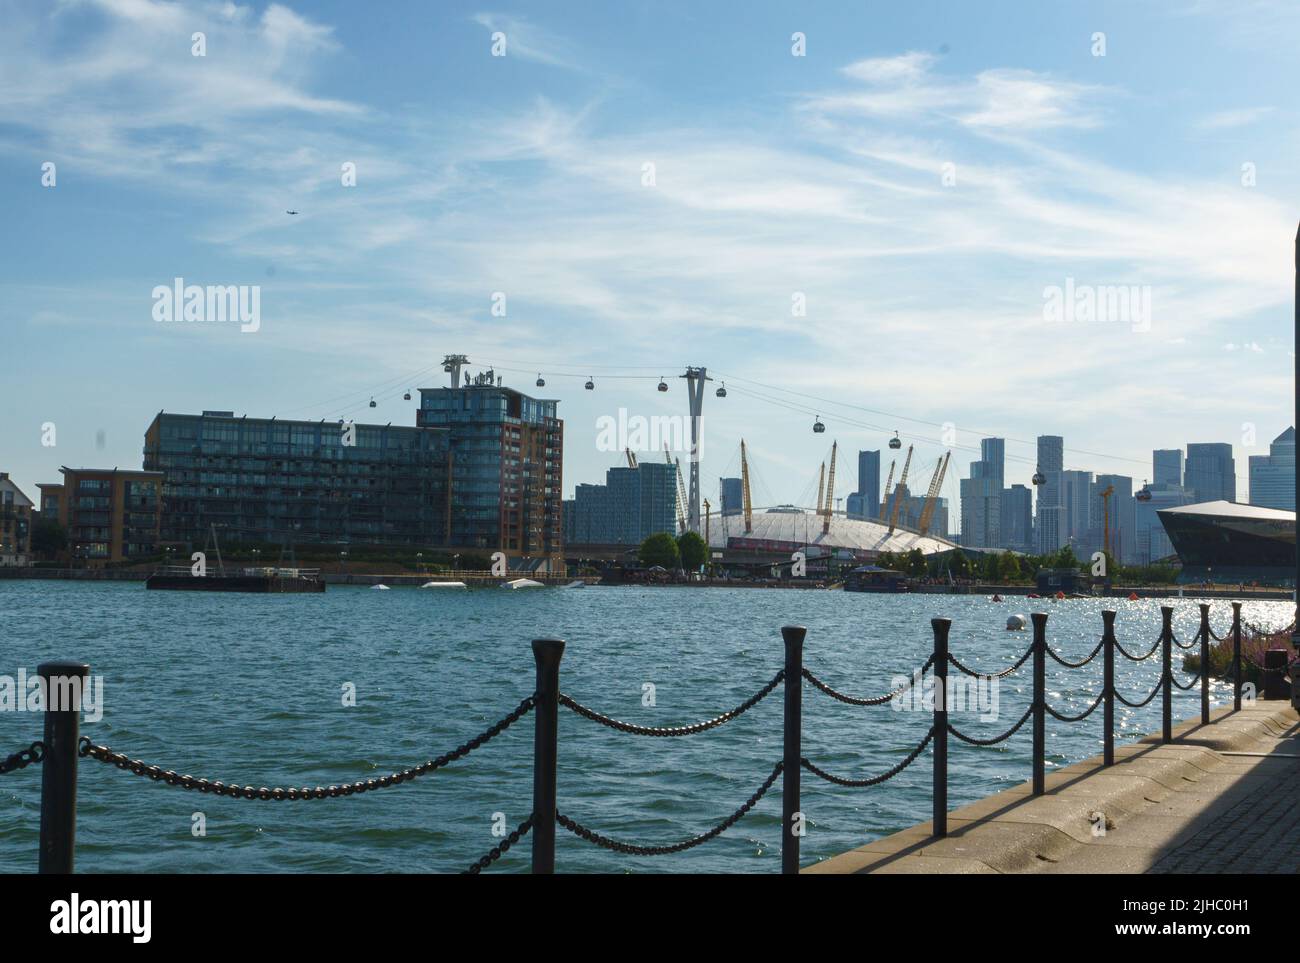 A view of the millennium dome and cable cars from the Royal Victoria Dock, London, UK Stock Photo